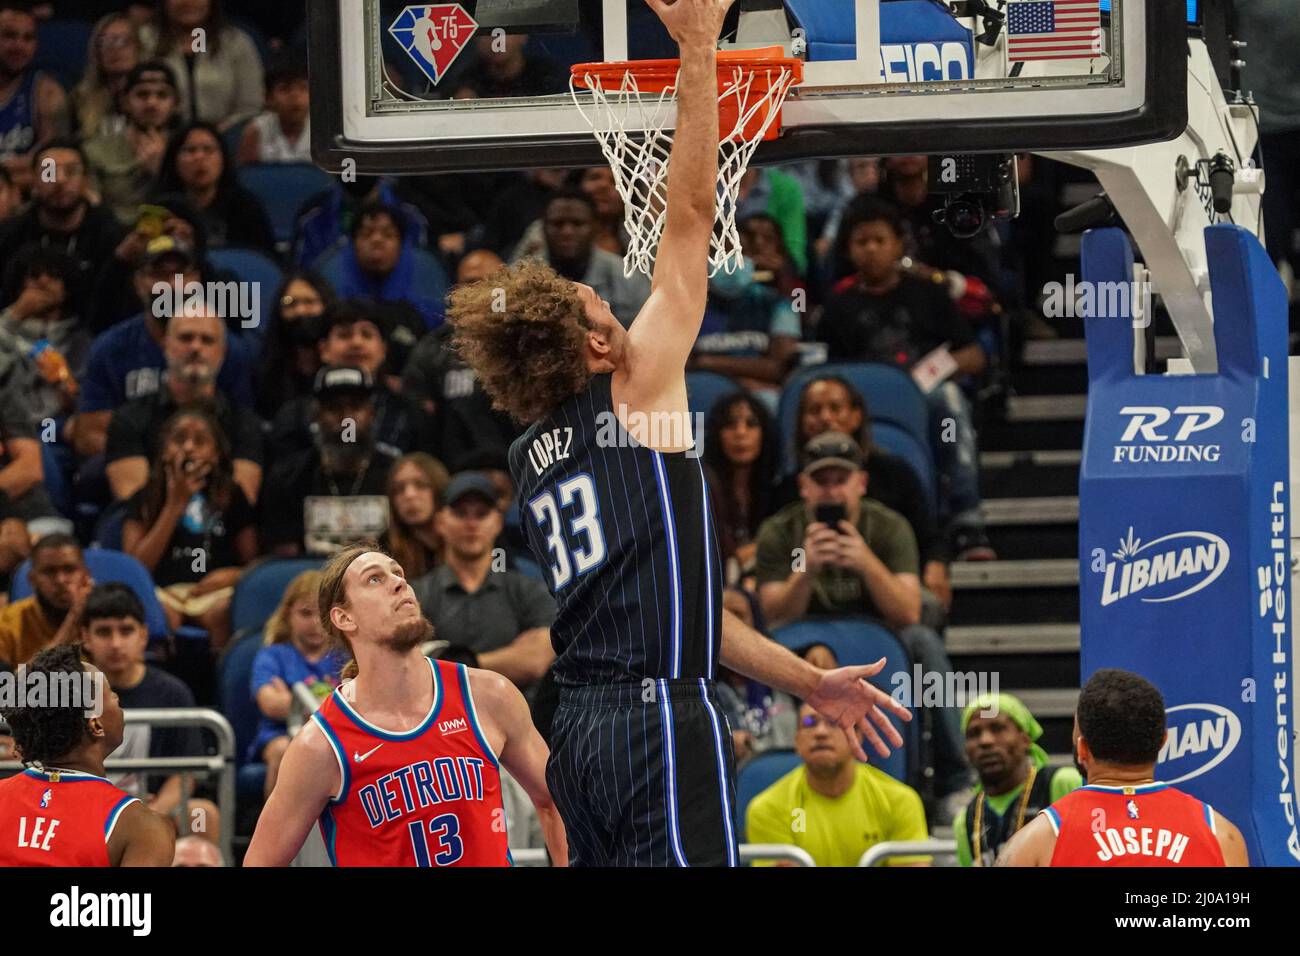 Orlando, Florida, USA, March 17, 2022, Orlando Magic Center Robin Lopez #33  makes a basket in the first half at the Amway Center. Credit: Marty Jean- Louis/Alamy Live News Stock Photo - Alamy